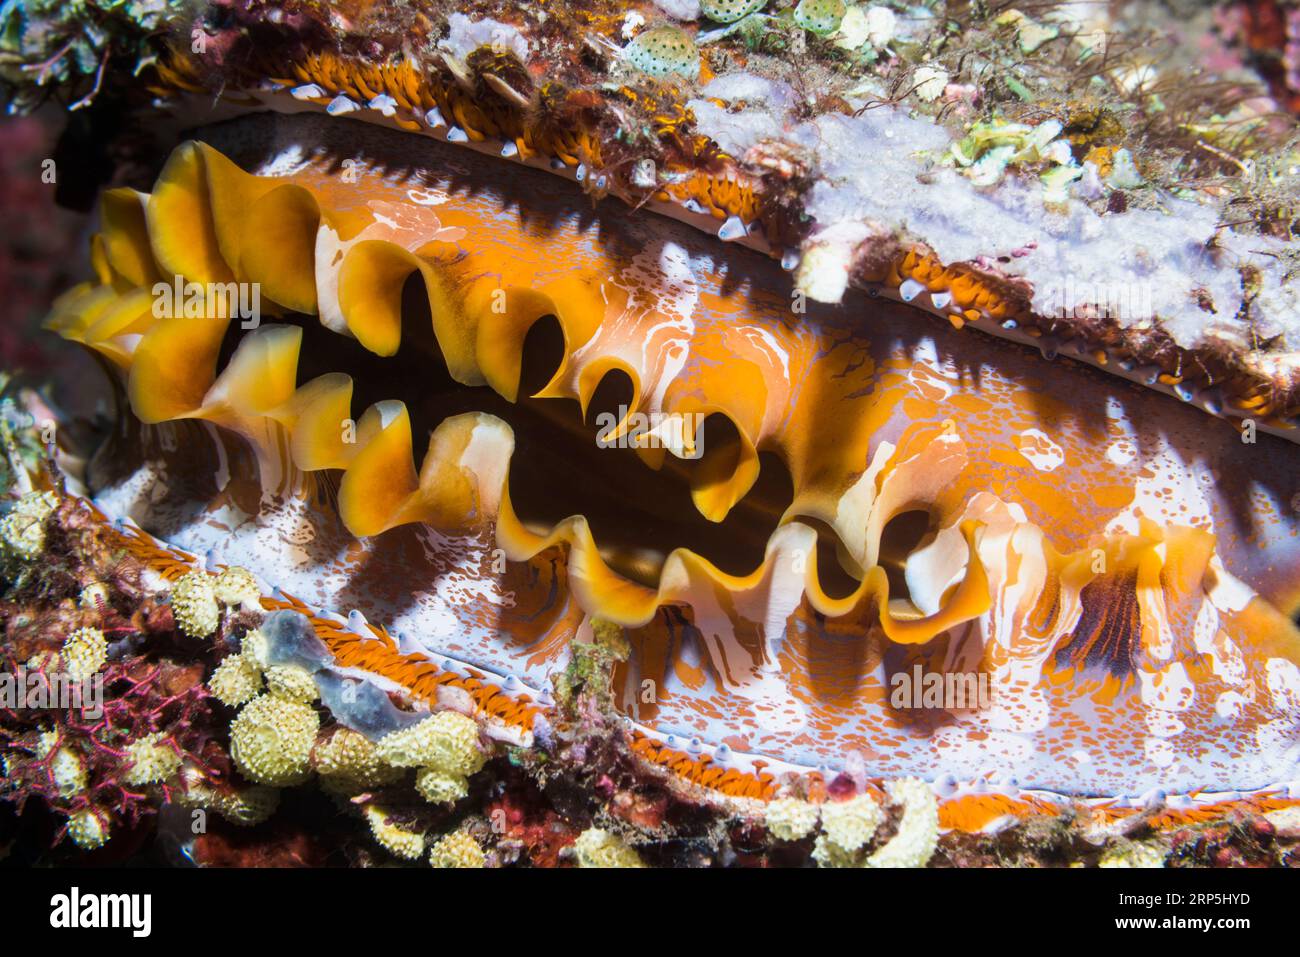 Thorny oyster [Spondylus varians], pattern of mantel.  When the oyster closes, the shell looks like part of the reef.  Tulamben, Bali, Indonesia. Stock Photo